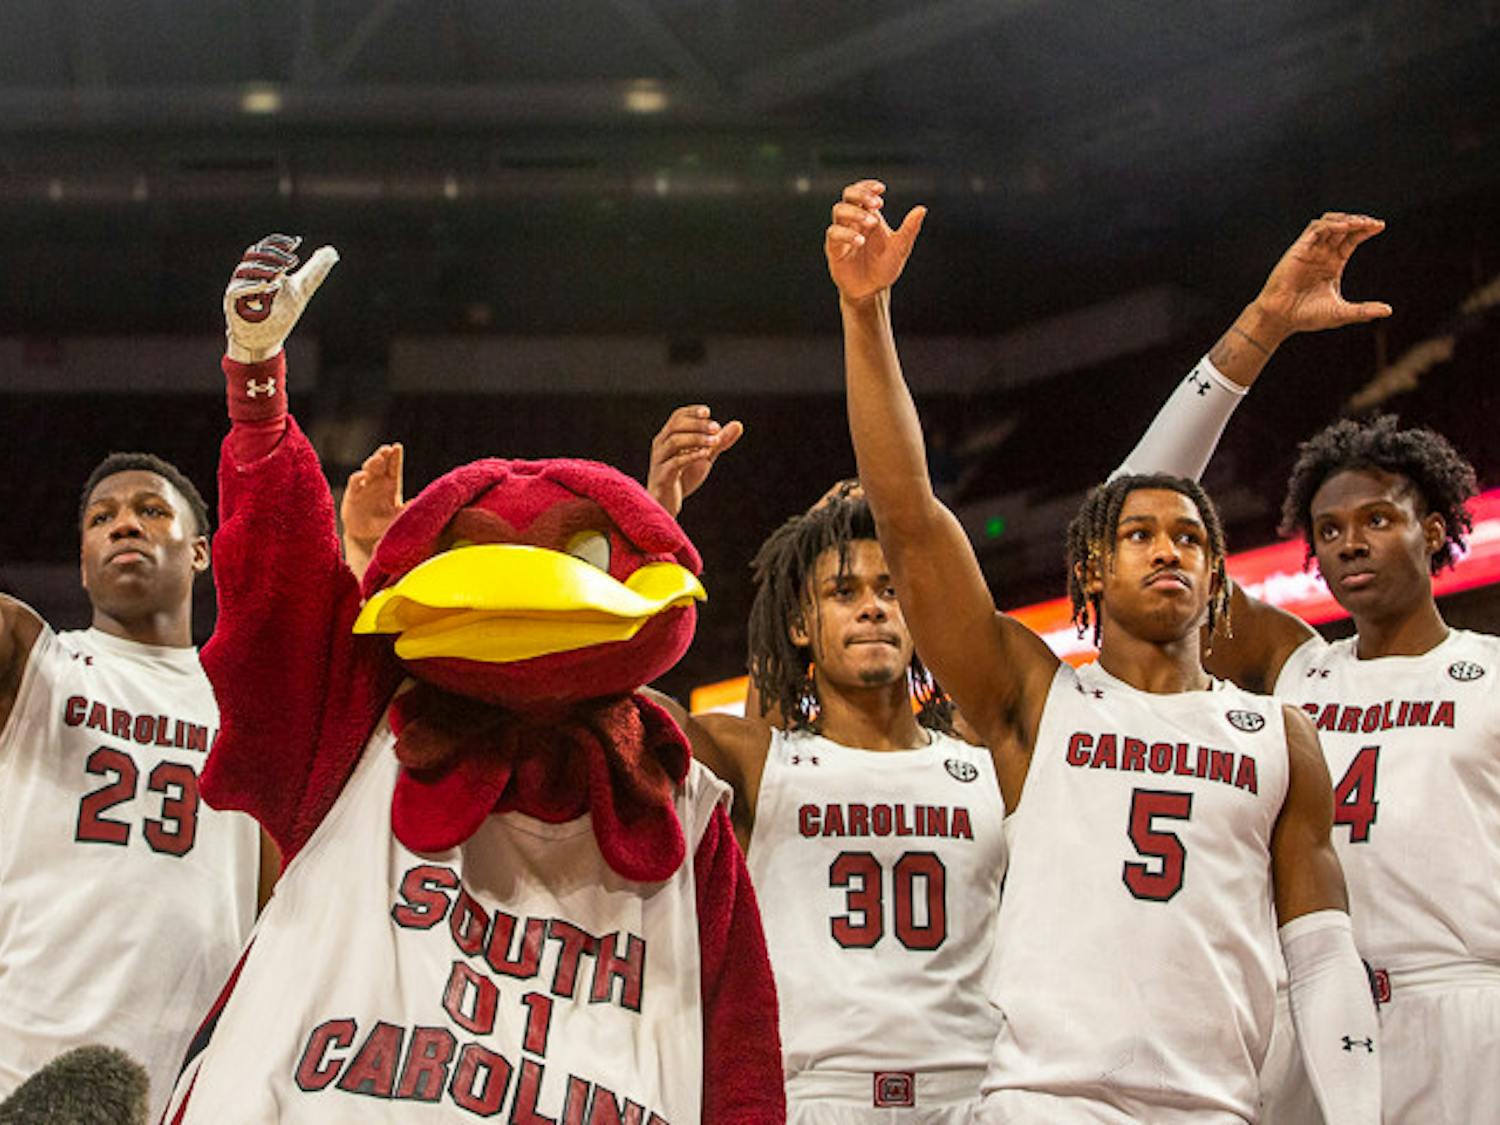 The men’s basketball team and Cocky offer a toast during the playing of South Carolina's alma mater after the Gamecocks victory over S.C. State. The Gamecocks defeated the Bulldogs 80-77 on Nov. 8, 2022.